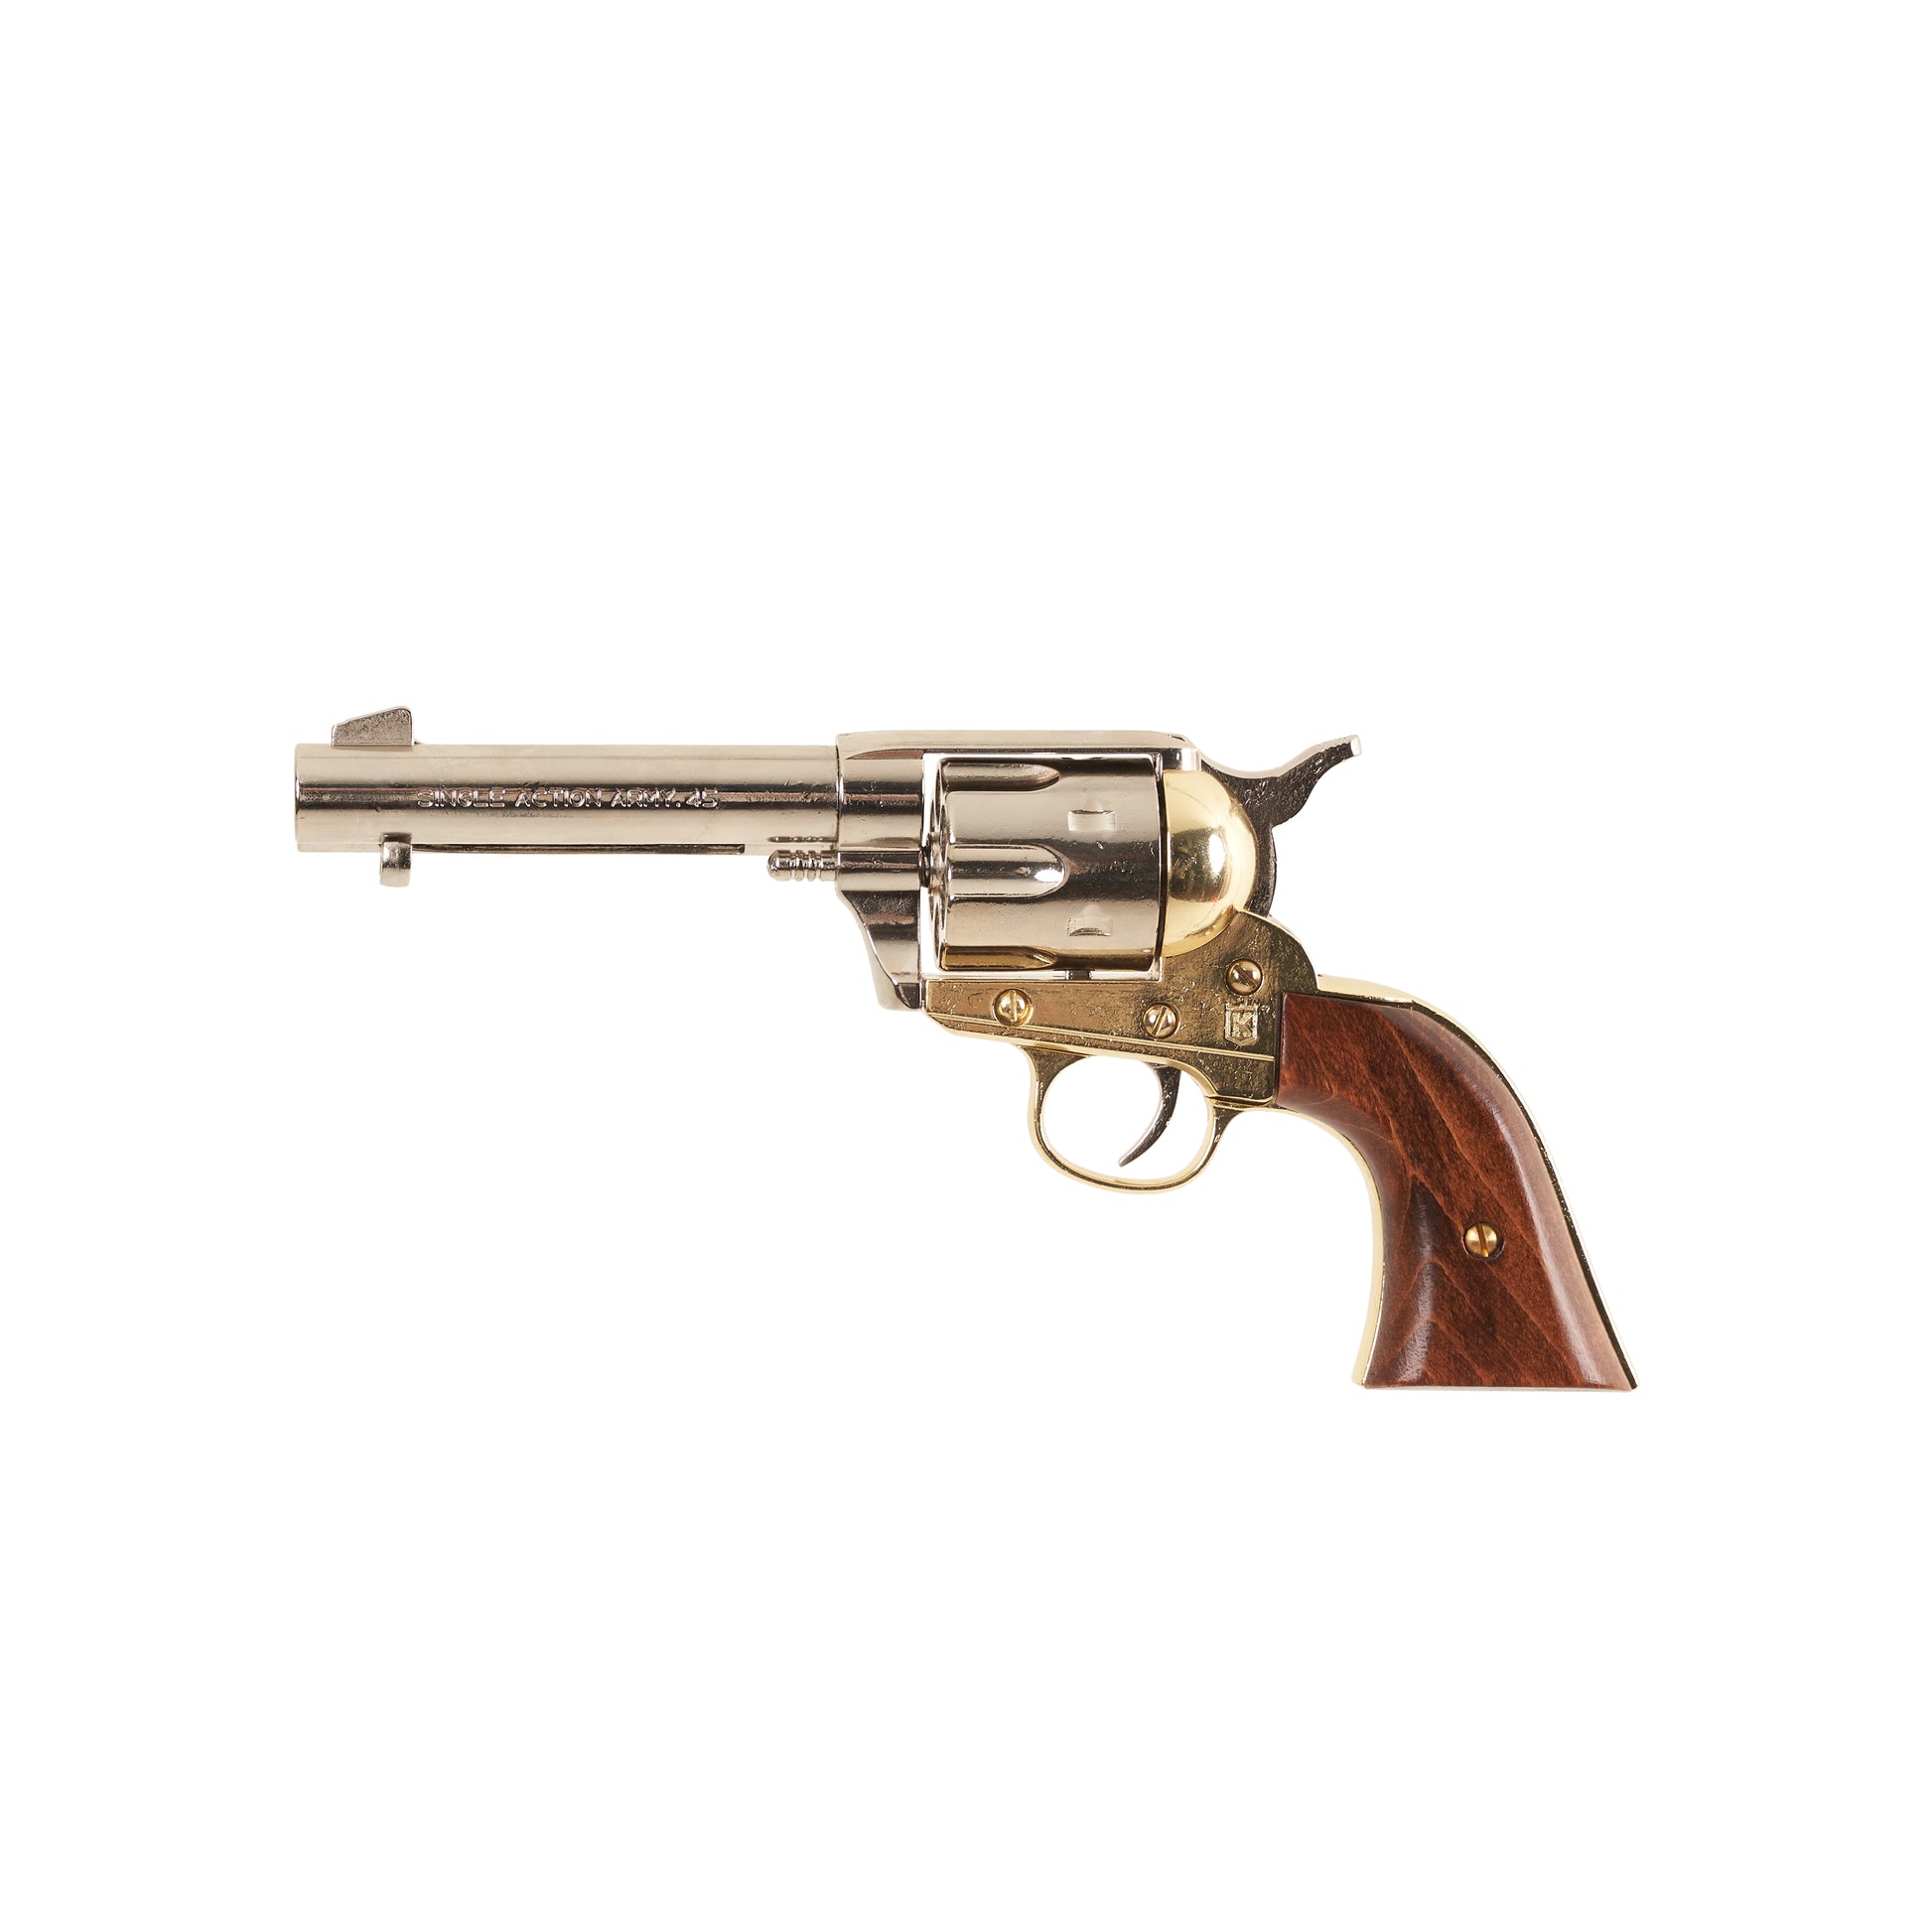 Left side view of polished nickel 1873 .45 Caliber Single Action Revovler with wood grip and brass trigger guard.